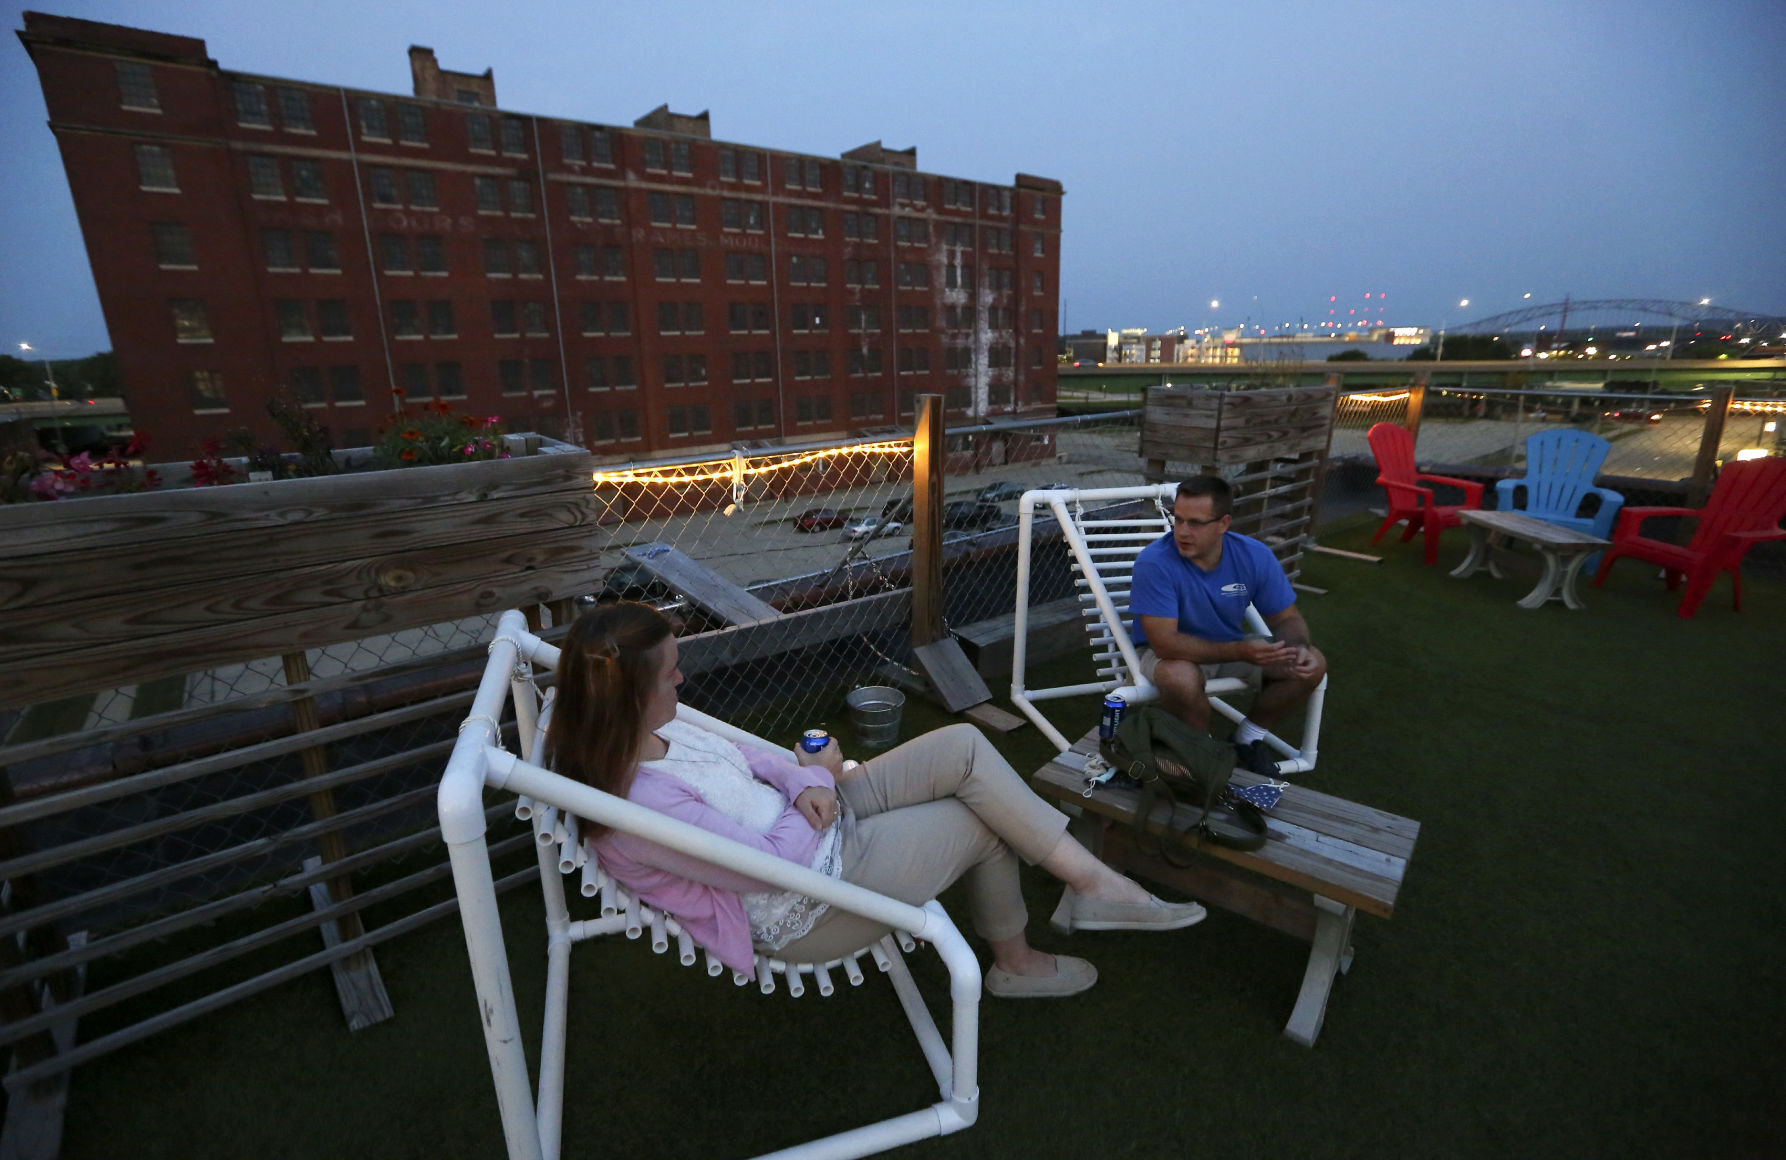 Tara (left) and Nick Baker, of Dubuque, hang out on the rooftop at Smokestack in Dubuque on Friday, Sept. 25, 2020. PHOTO CREDIT: NICKI KOHL